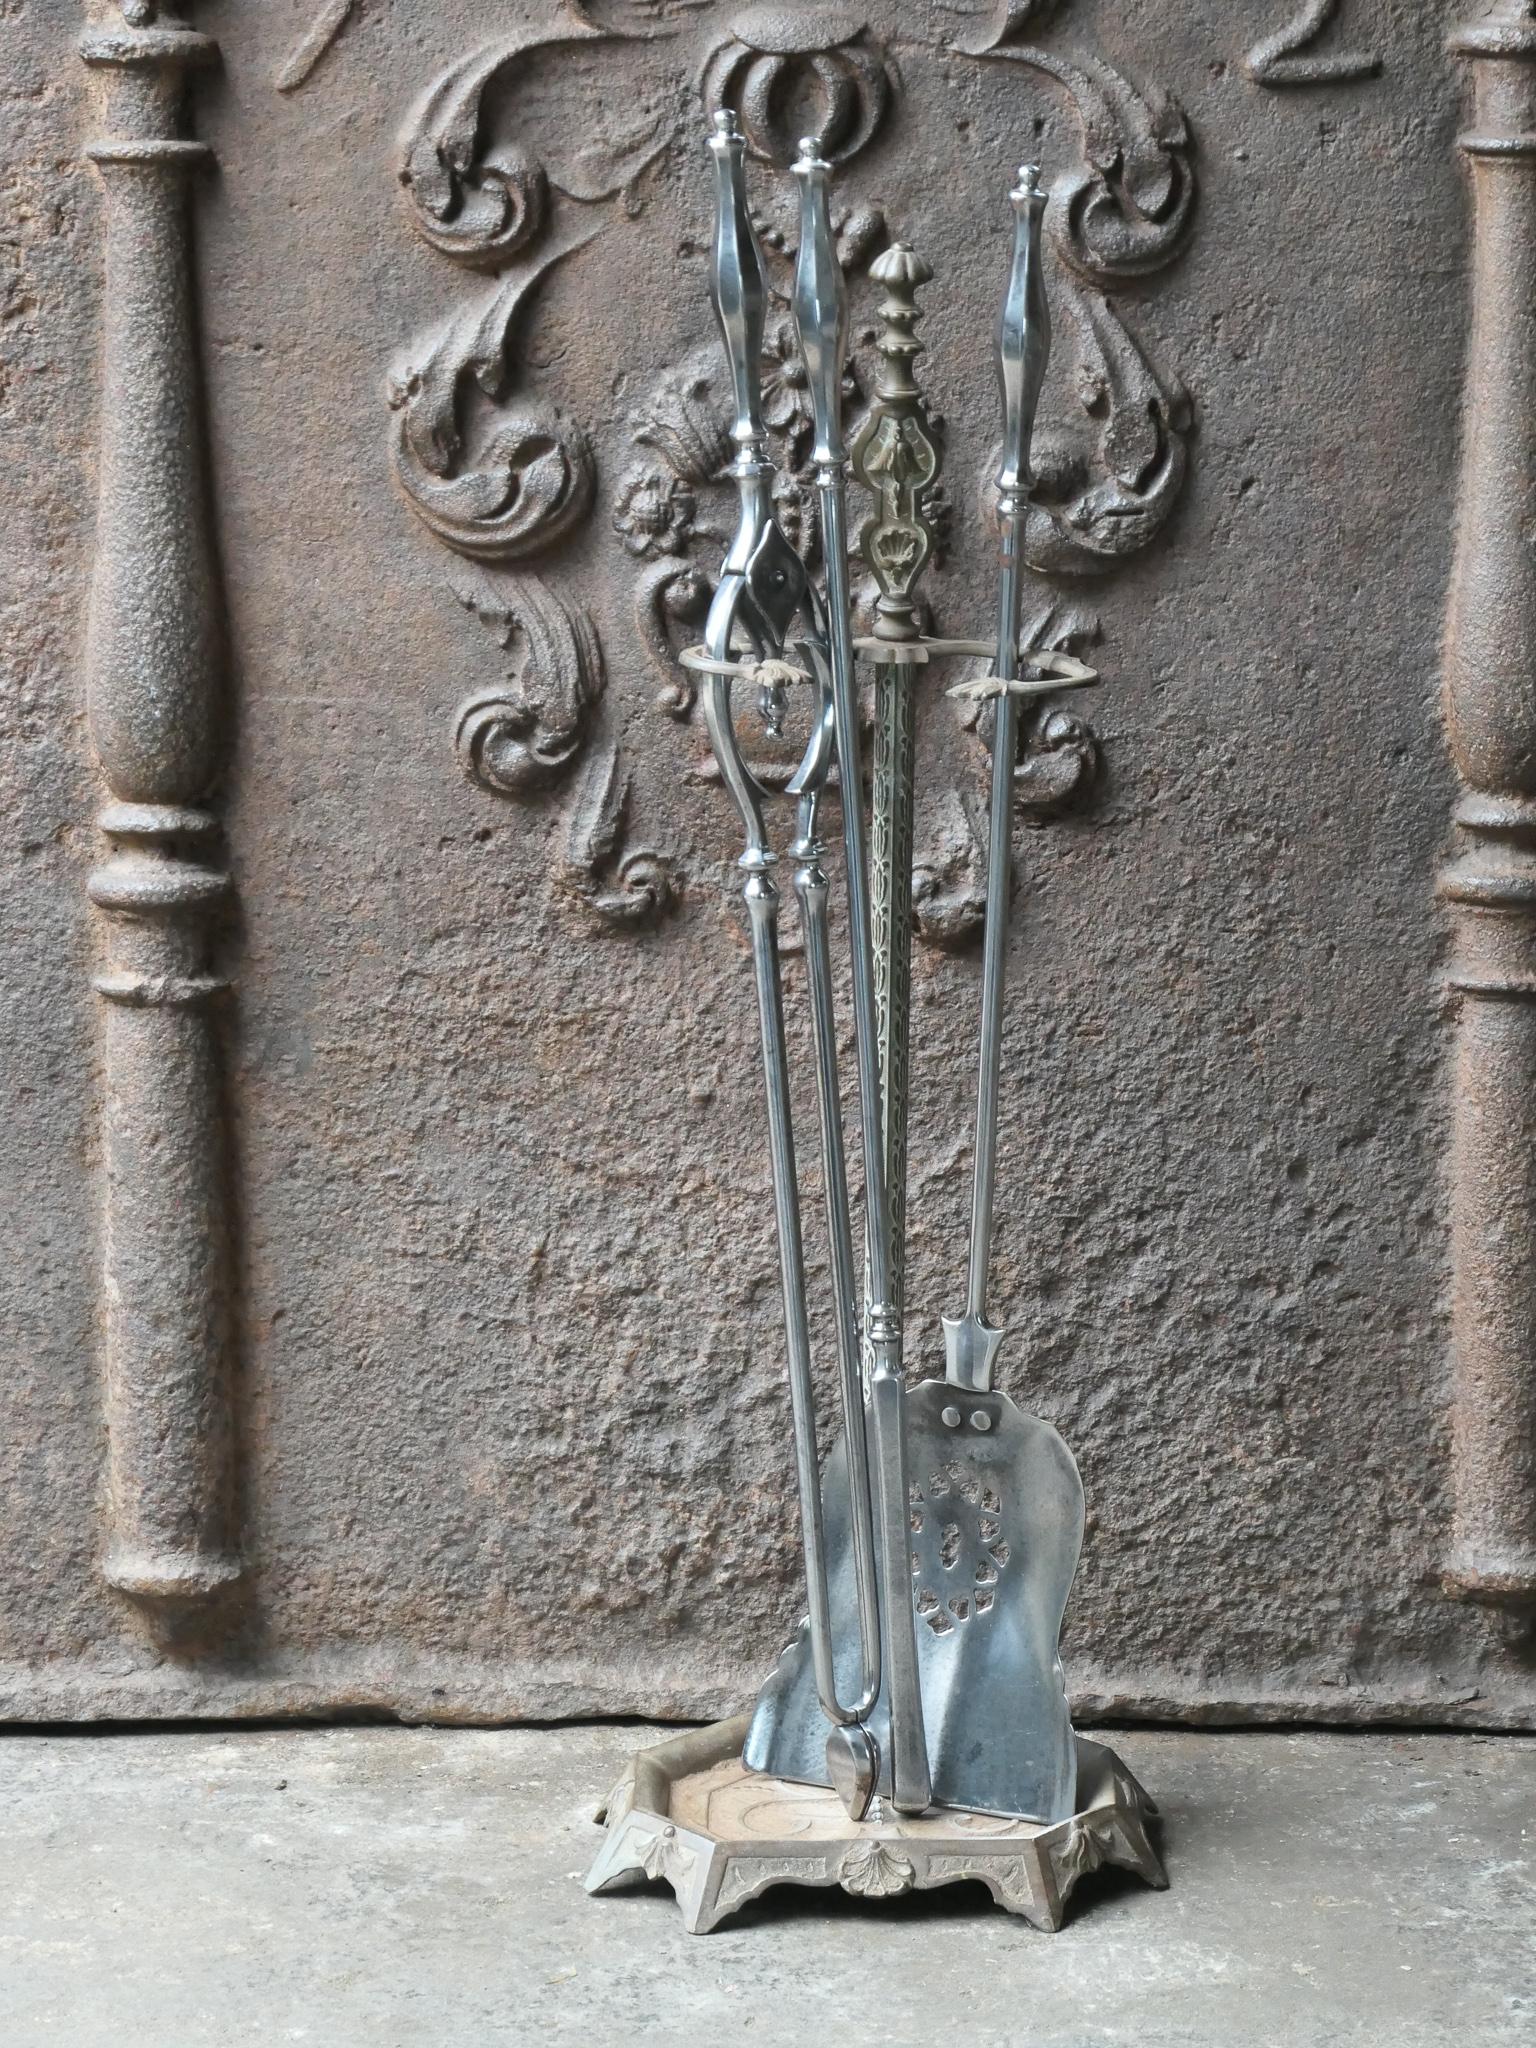 Beautiful 18th - 19th century English Georgian fireplace tool set. The tool set consists of tongs, shovel, poker and stand. The stand is made of wrought iron. The base of the stand is made of cast iron. The tools are made of polished steel. The set